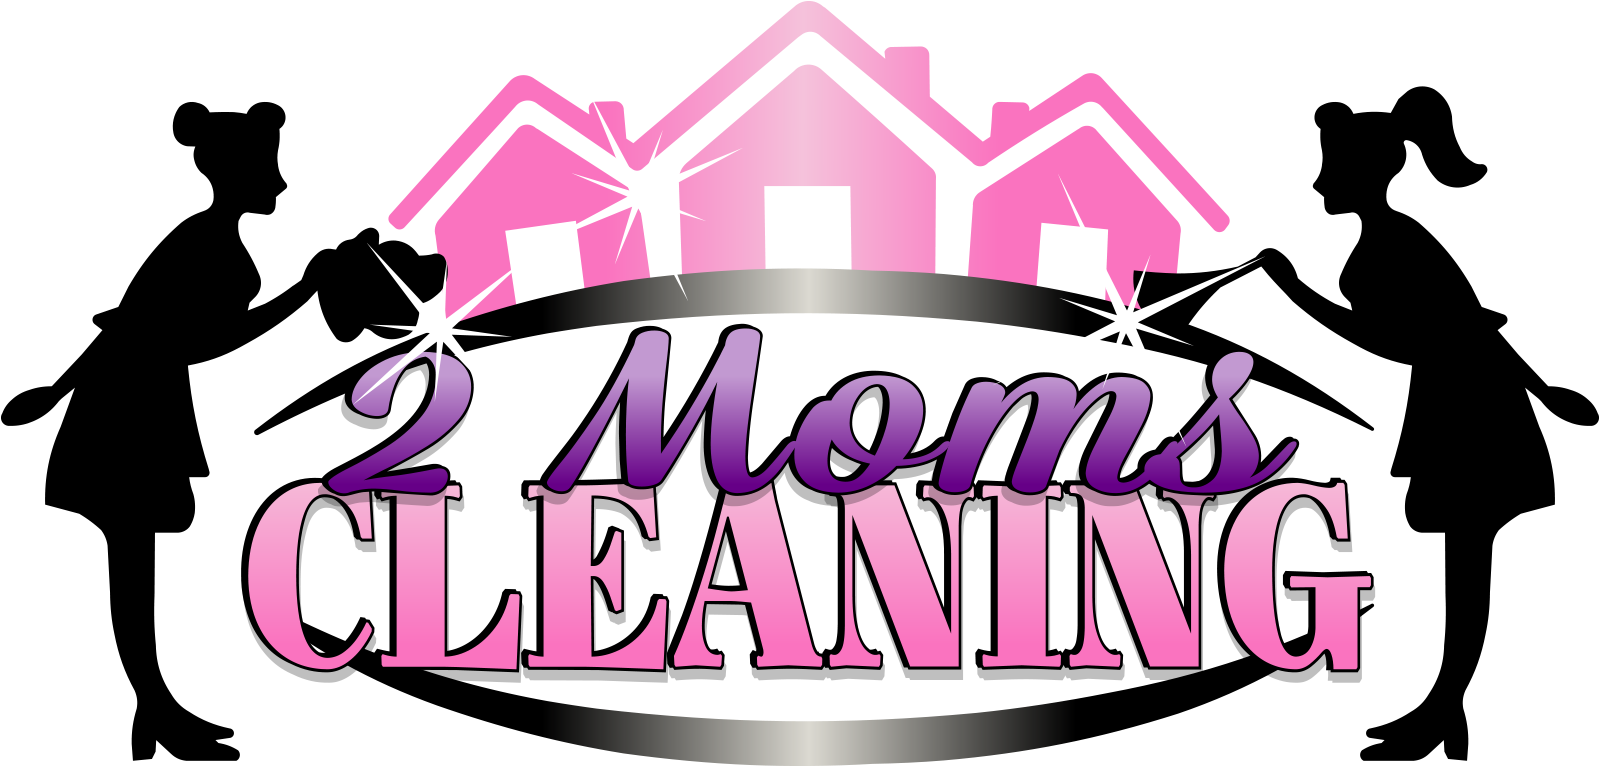 Copyright © 2018 2 Moms Cleaning, All Rights Reserved - 2 Moms Cleaning Llc (1684x843)